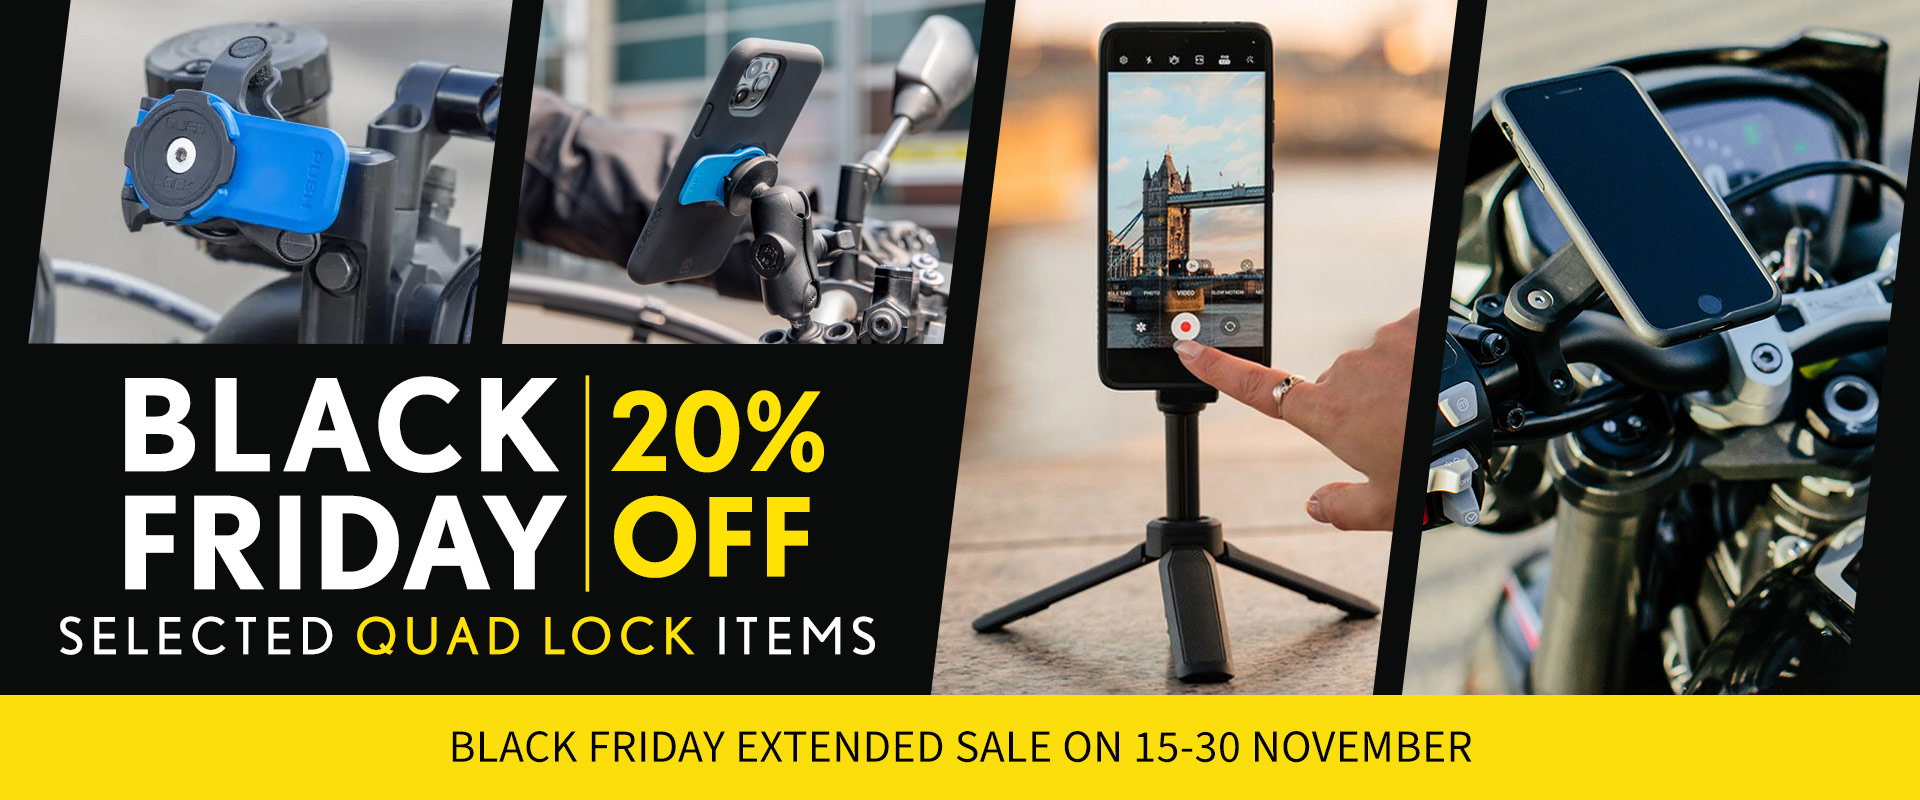 Black Friday: 20% Off Selected Quad Lock Items